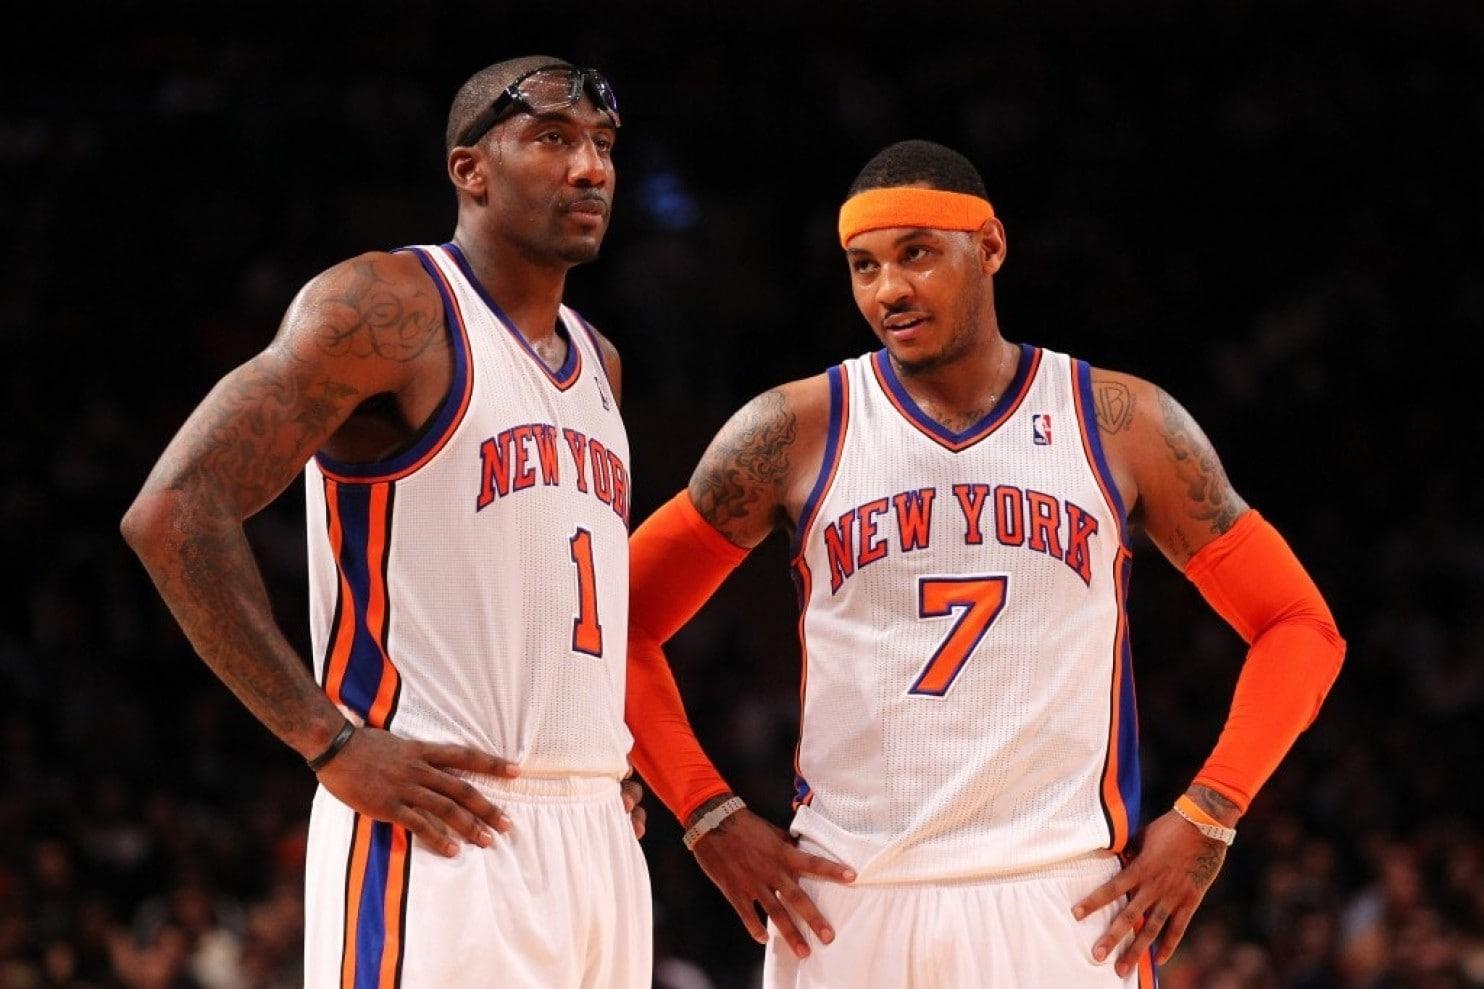 Amar'e Stoudemire throws shade at Carmelo Anthony, discusses Jeremy